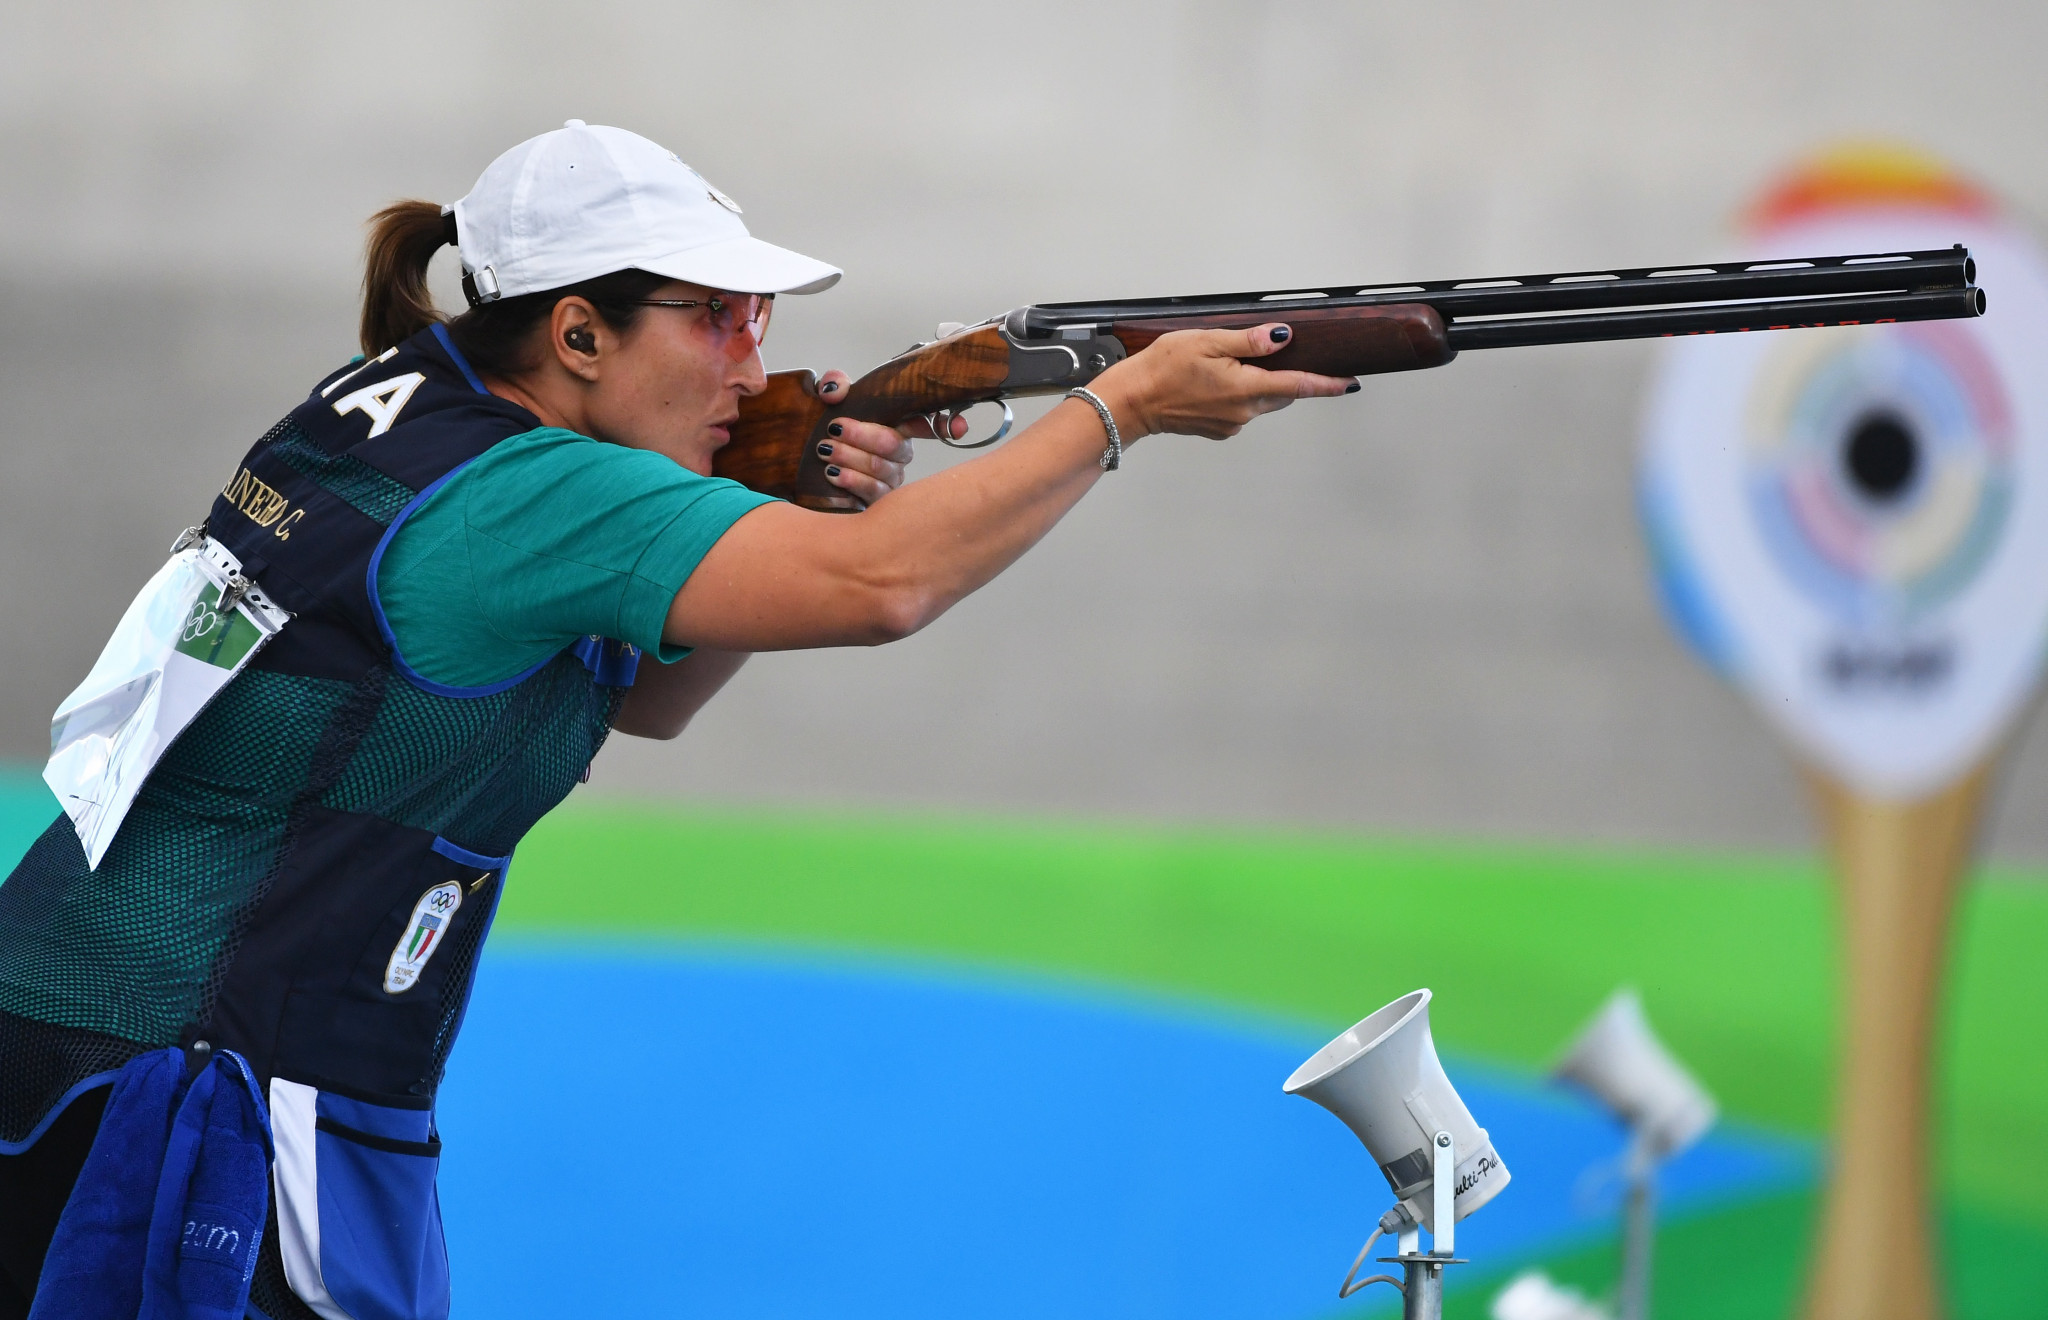 Italian shooters make strong start to ISSF Shotgun World Cup in Lonato